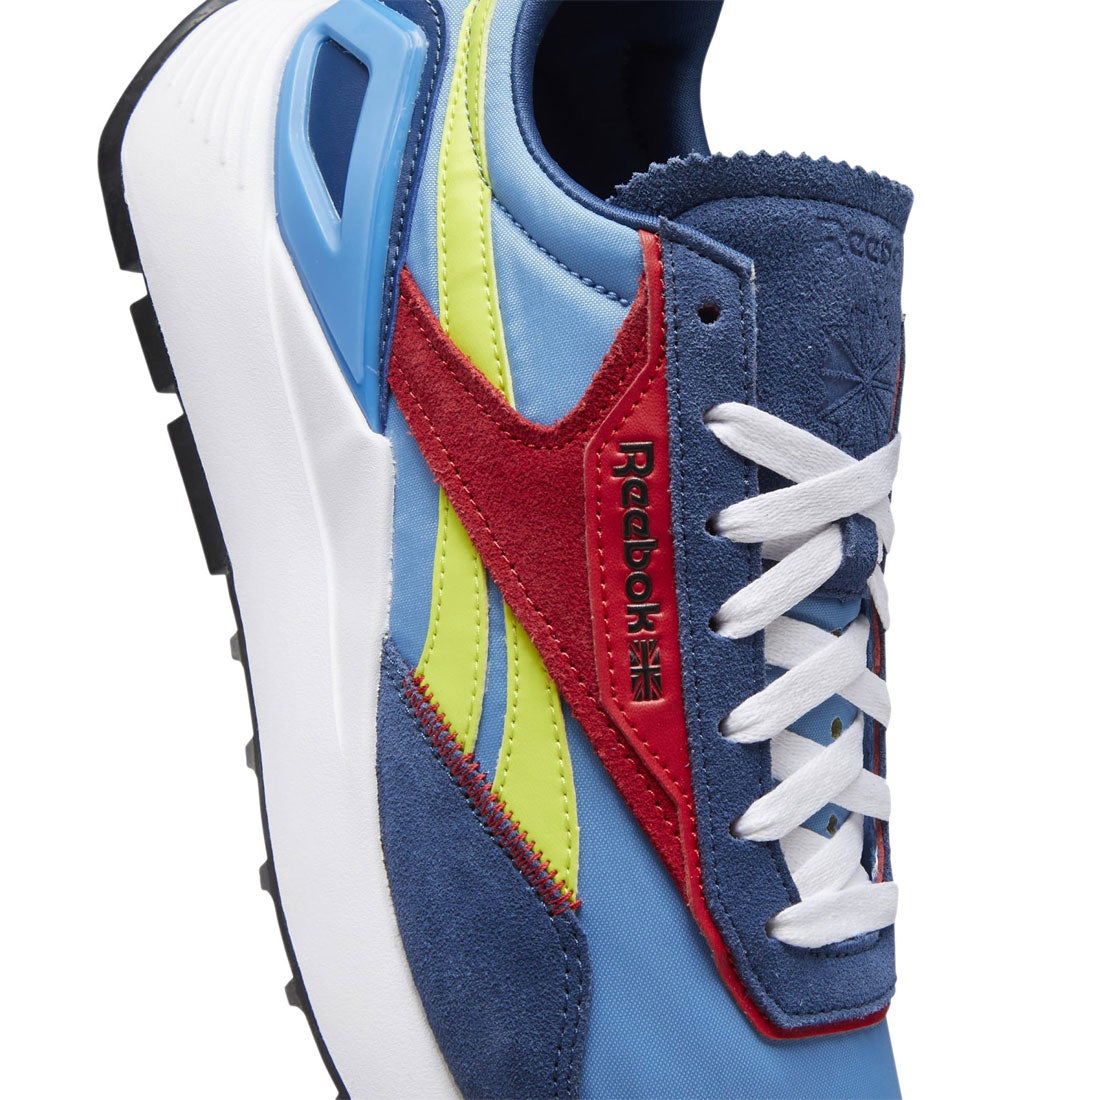 【 REEBOK CLASSIC LEATHER LEGACY AZ 'VECTOR BLUE RED' / VECTOR BLUE VECTOR RED CHALK 】 リーボック クラシック レザー レガシー 青色 ブルー 赤 レッド スニーカー メンズ